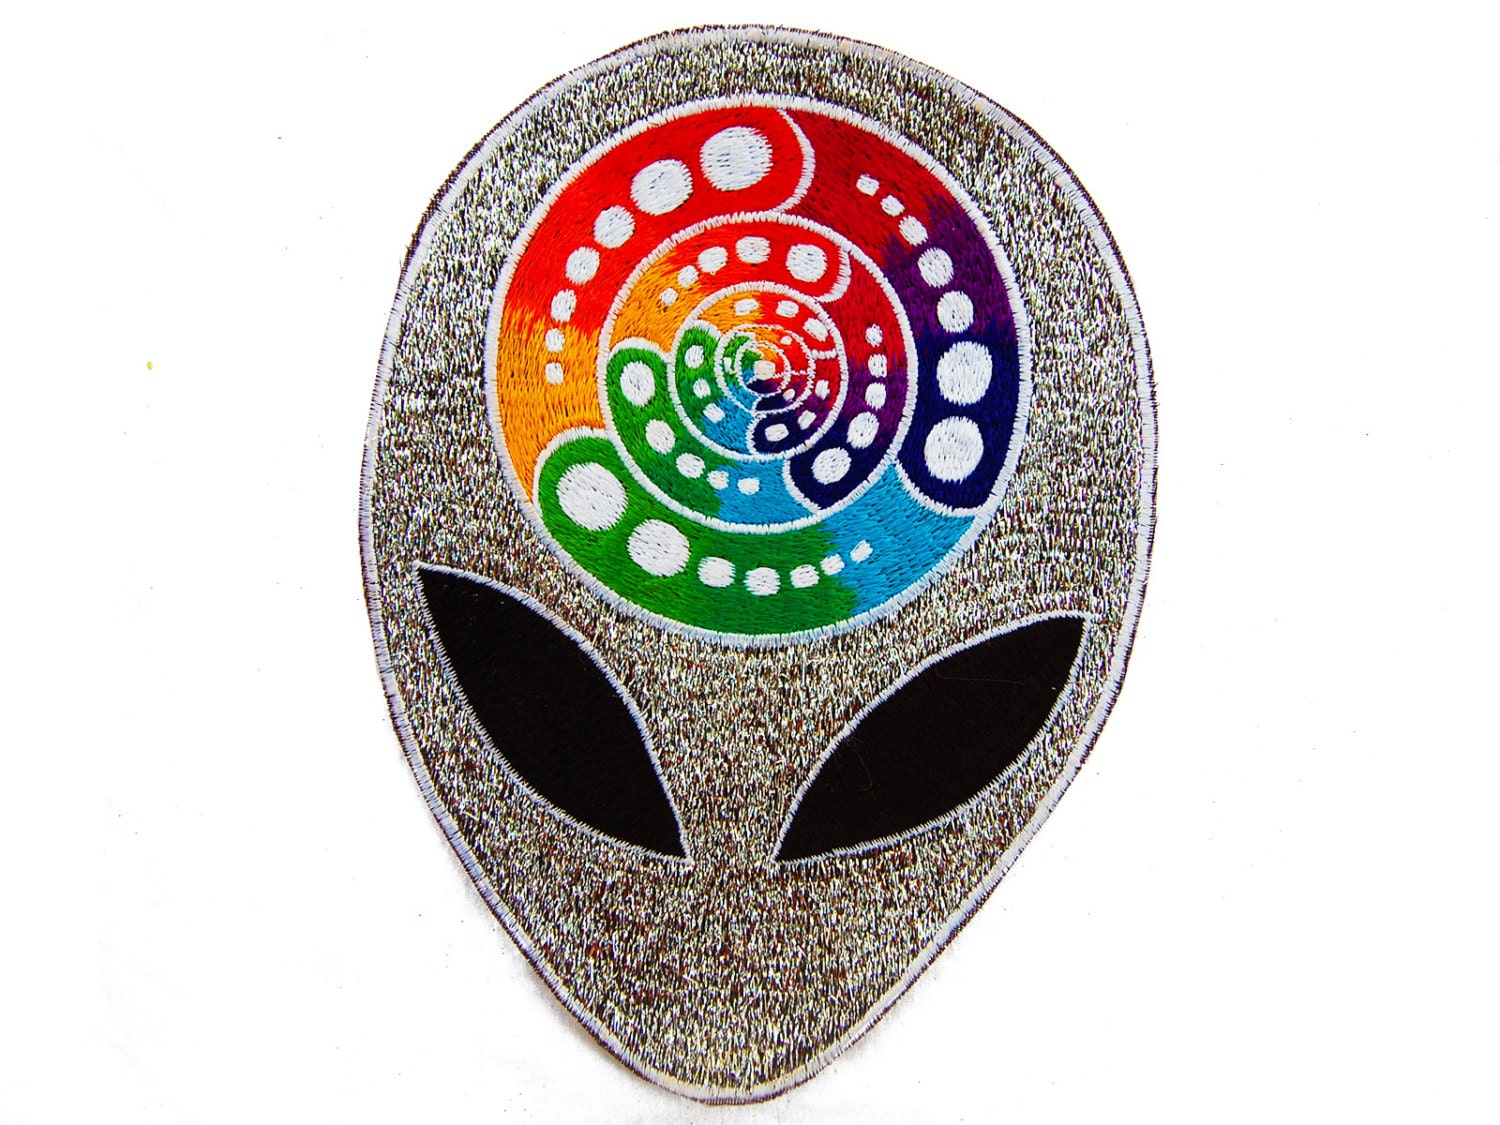 Silver Shining Alien Crop Circle embroidery Patch Attributes free energy sacred geometry from space holy patterns consciousness expanding ET